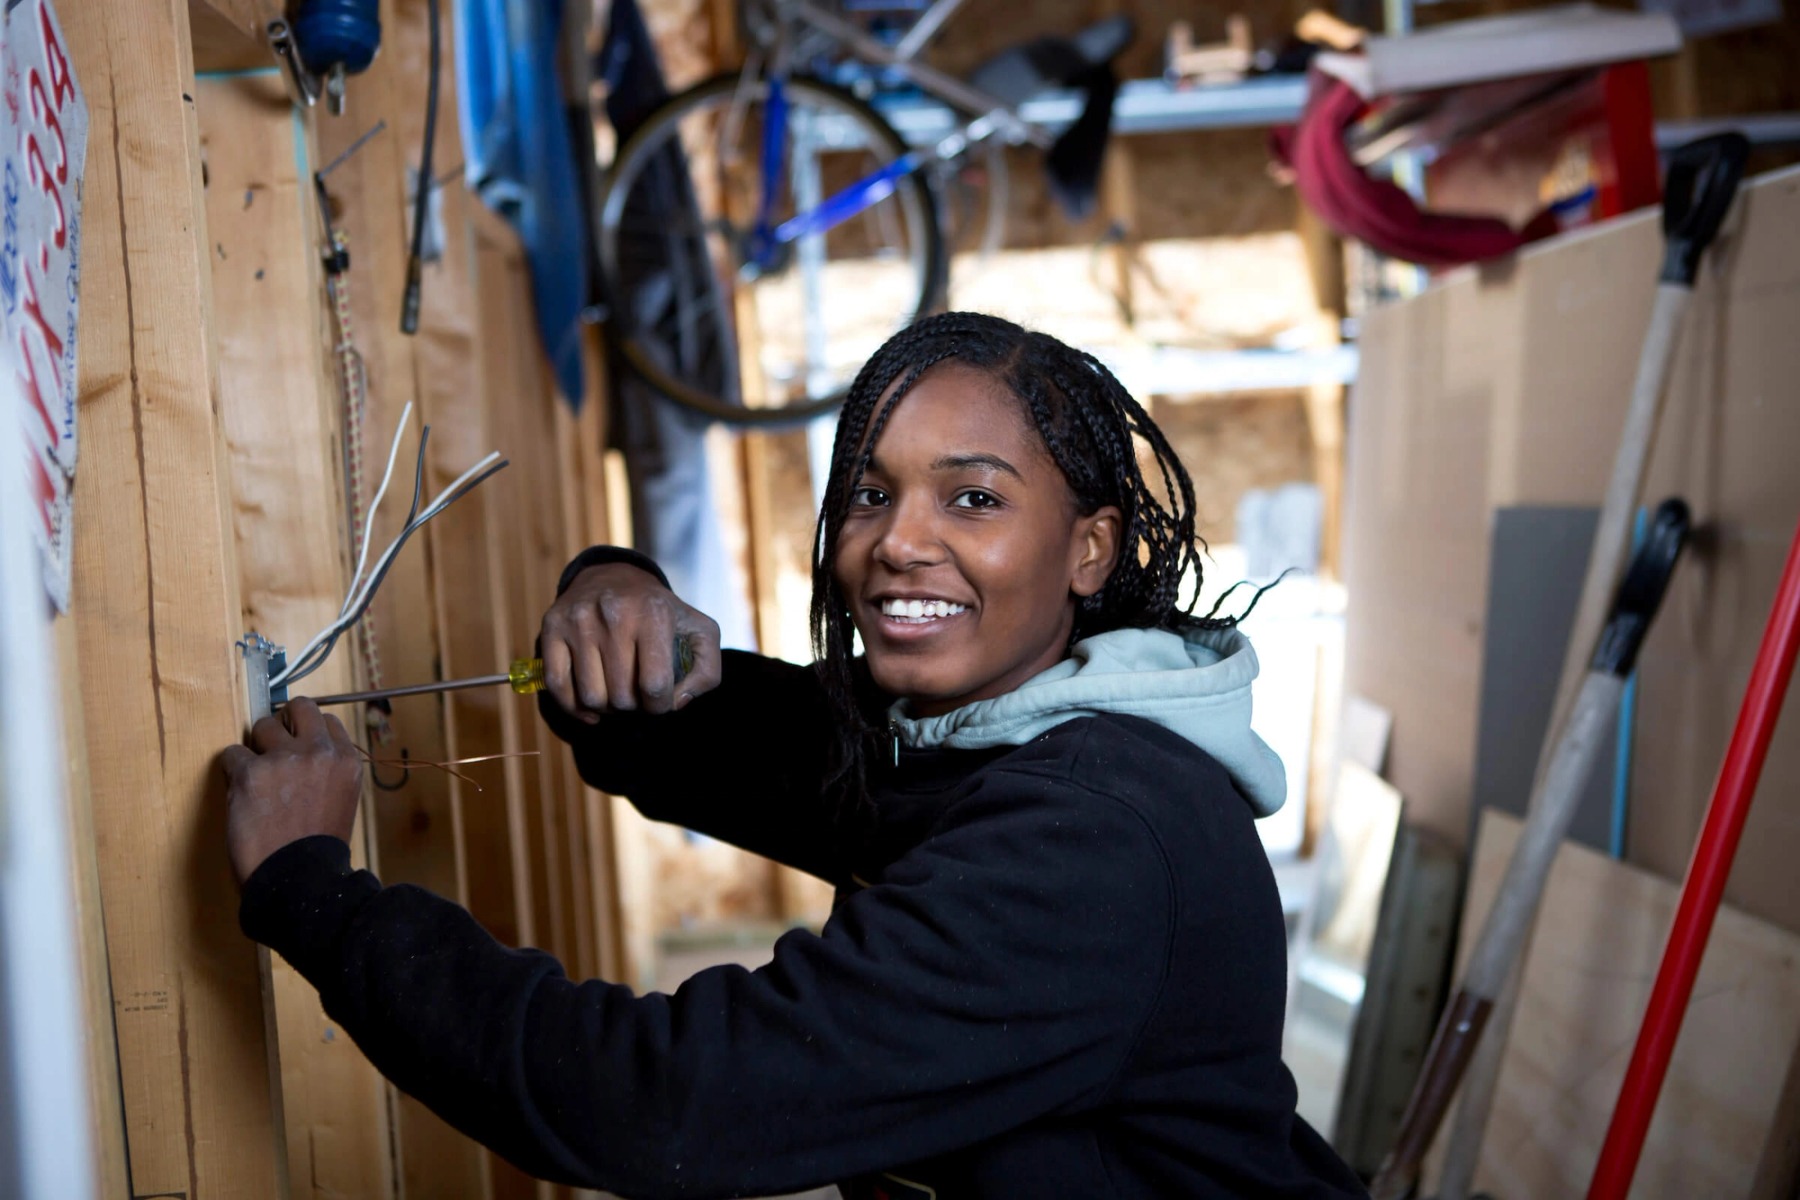 A woman in a black sweater handles electrical wiring along an unfinished wall.